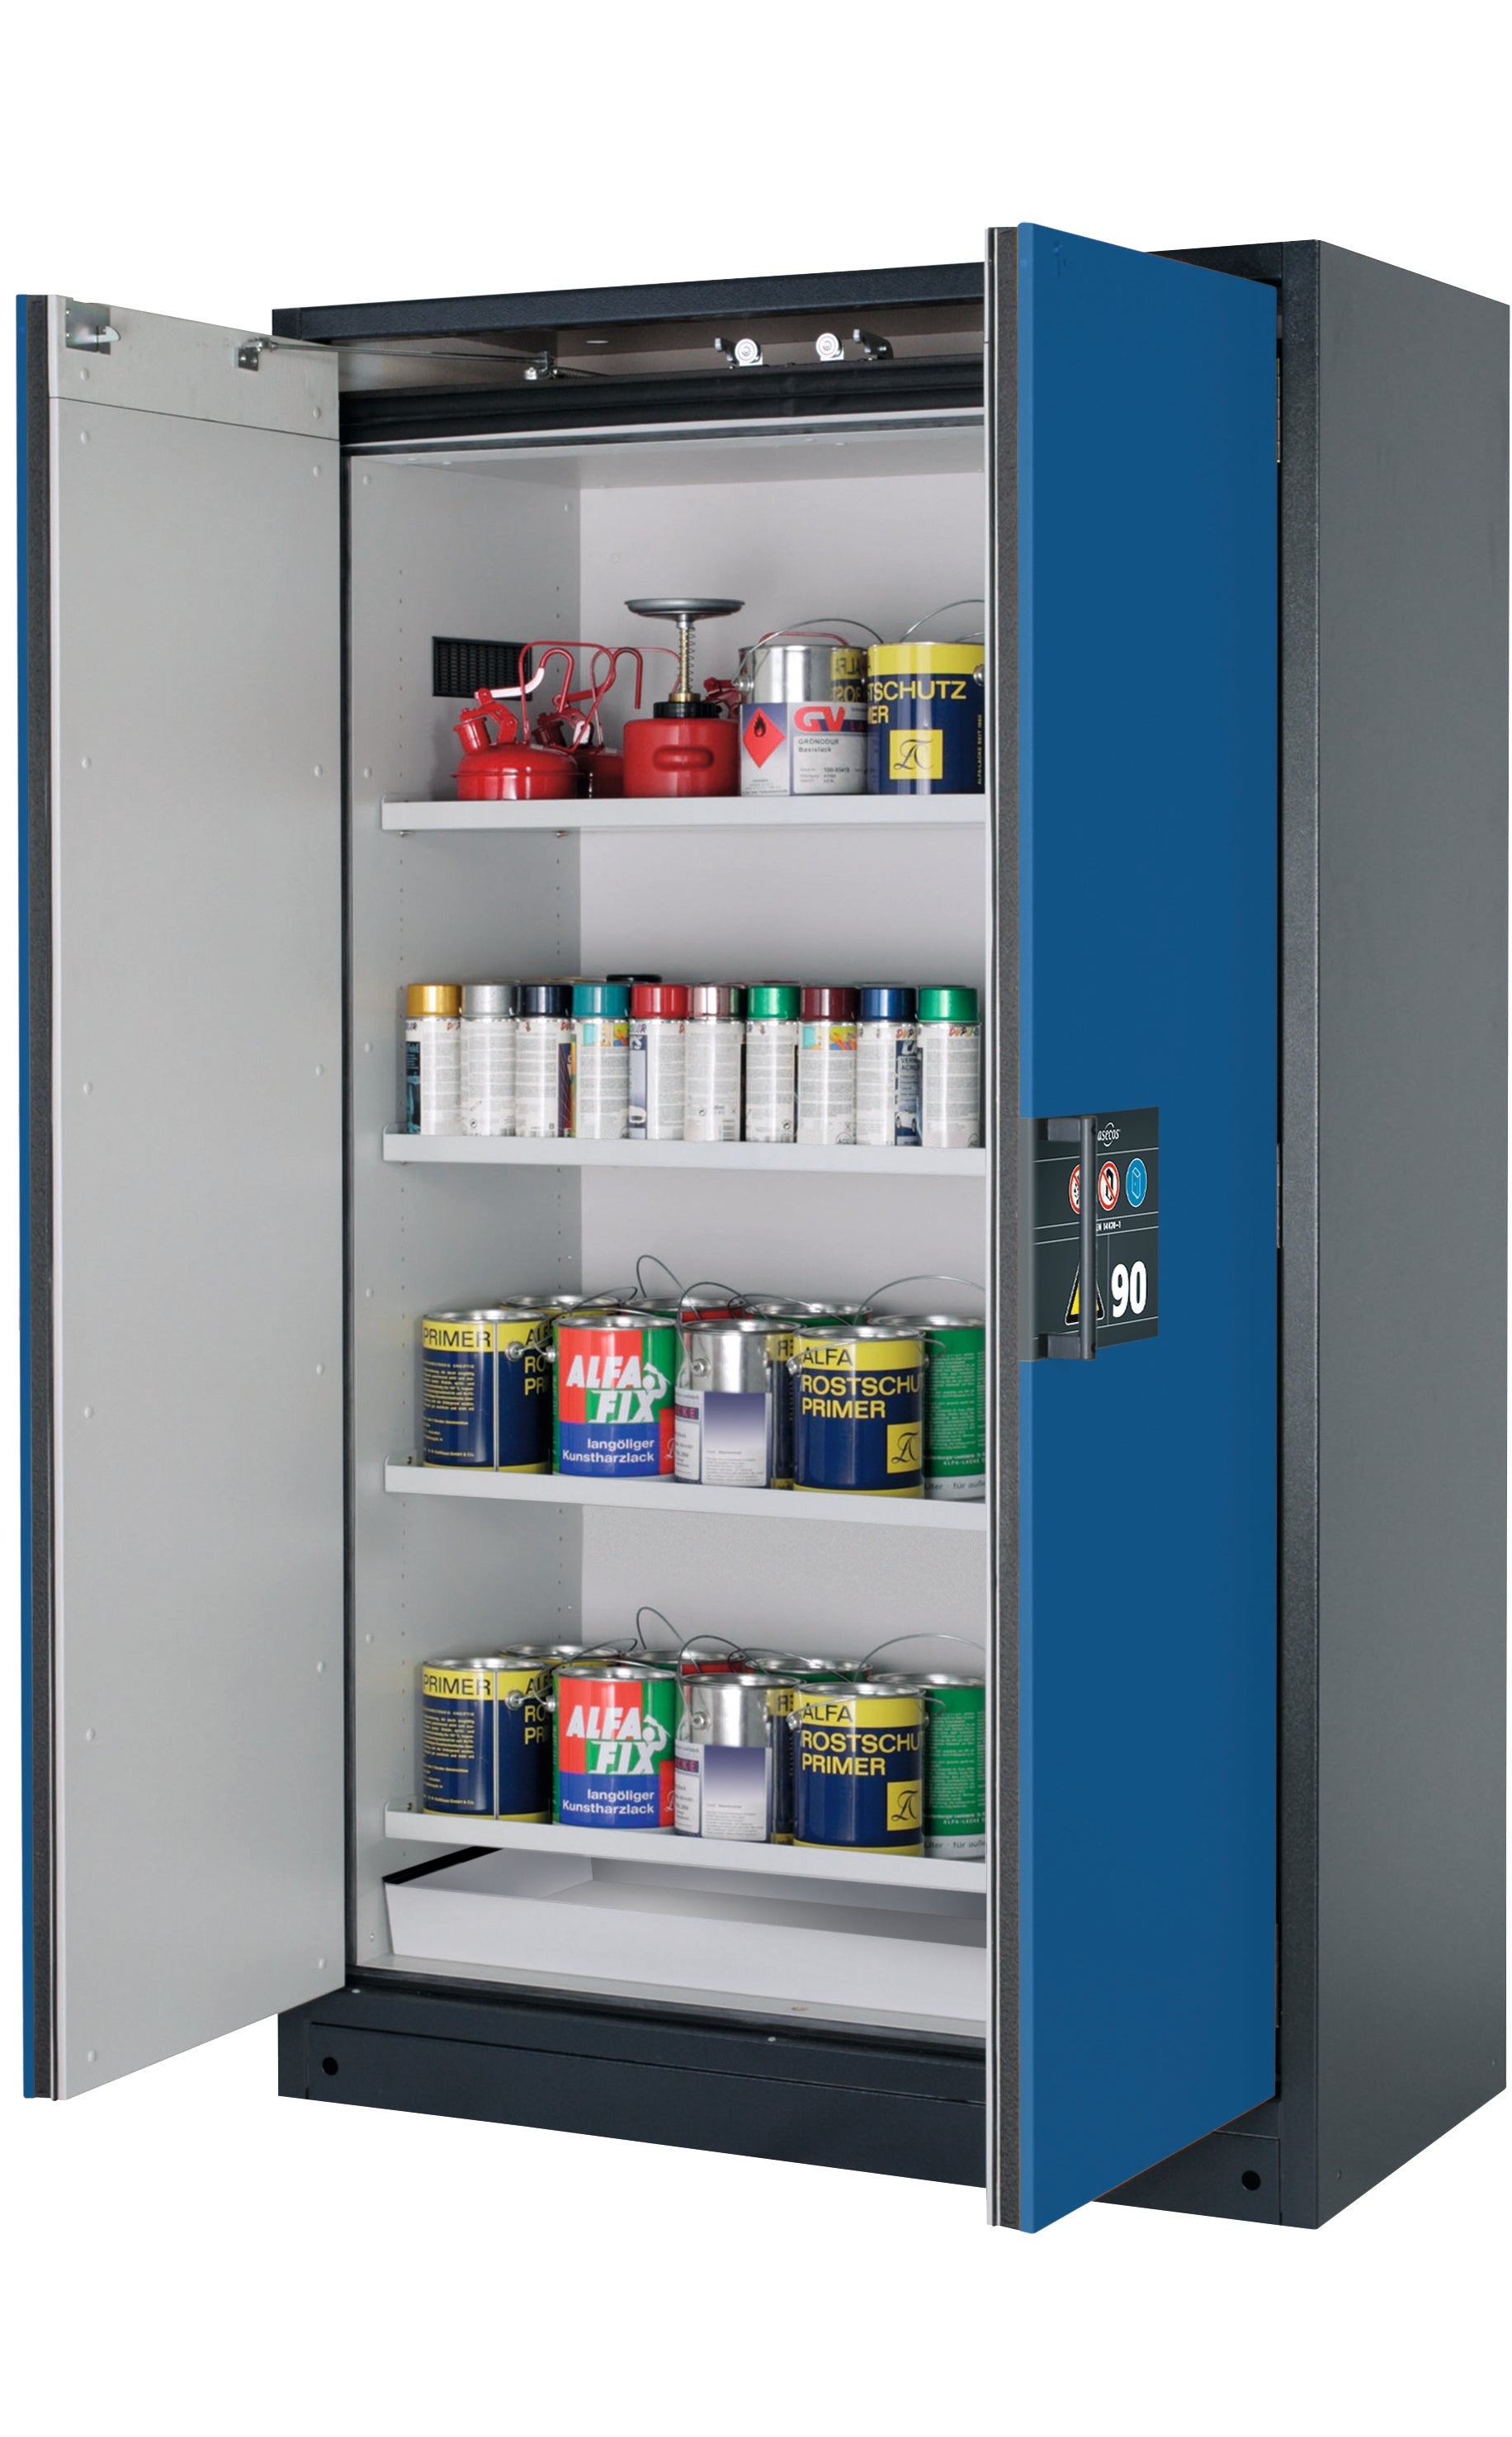 Type 90 safety storage cabinet Q-CLASSIC-90 model Q90.195.120 in gentian blue RAL 5010 with 4x shelf standard (sheet steel),